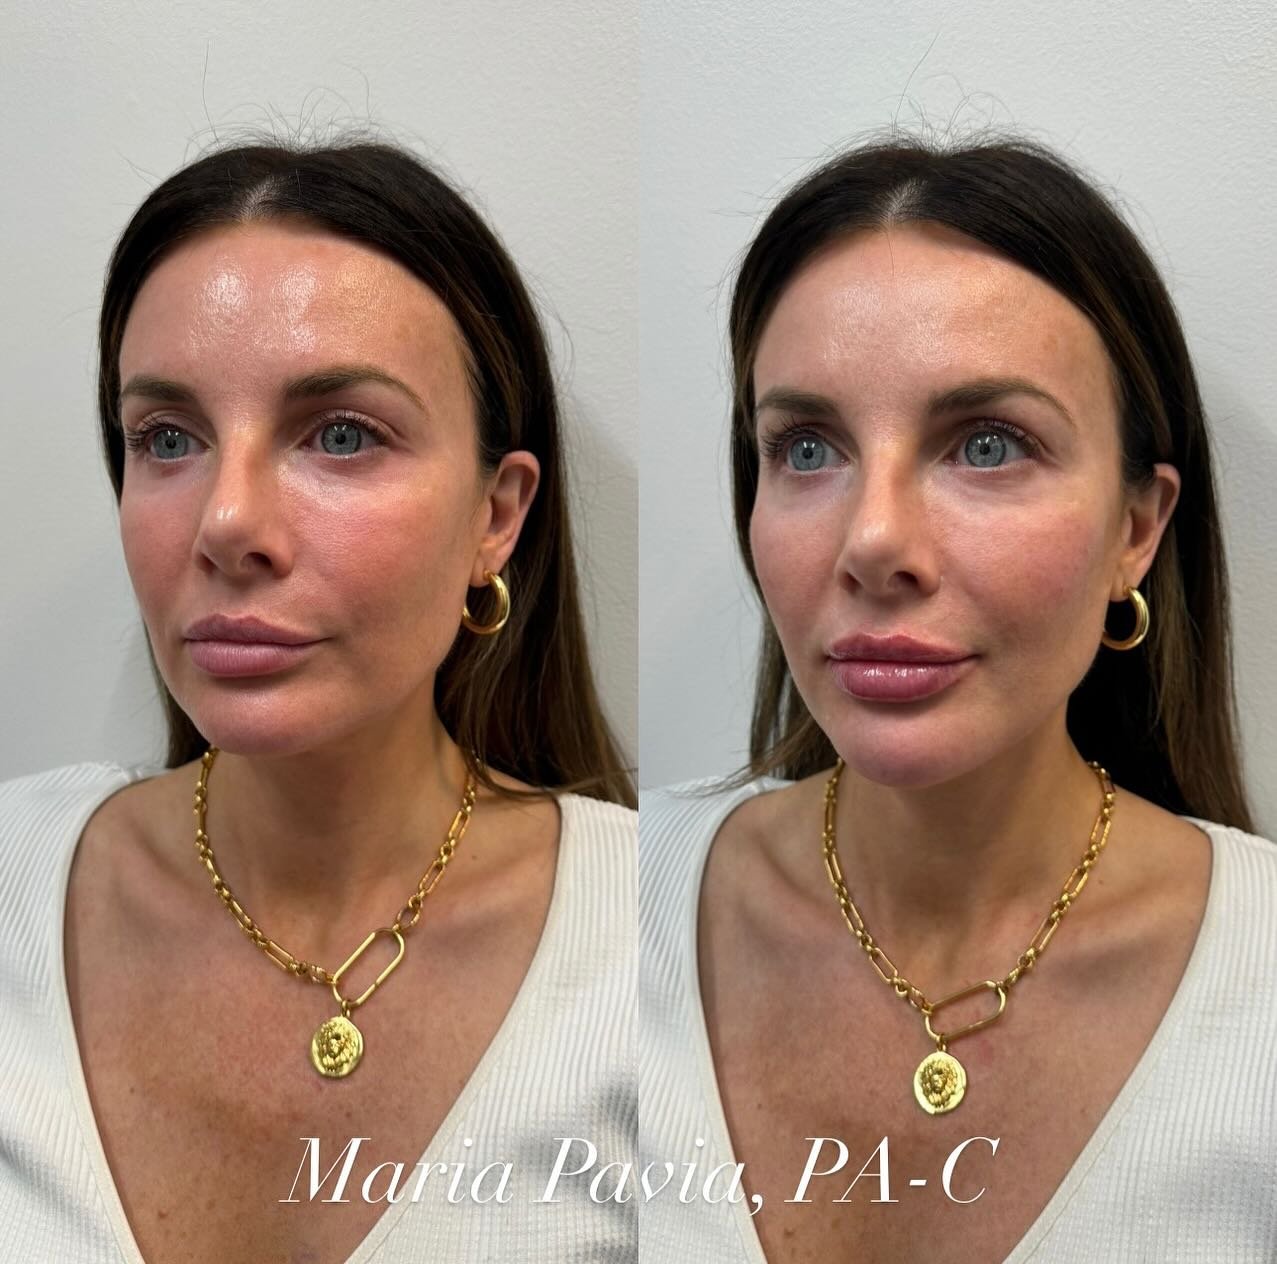 My patient is BEAUTIFUL to begin with

We focused on enhancing✨ the following areas 

✨ MID FACE
✨ CHEEKS
✨ CHIN &amp; CHIN SHADOWS 
✨ LIPS👄

Her results are gorgeous and so natural

#FacialBalancing #CheekFiller #NaturalLip